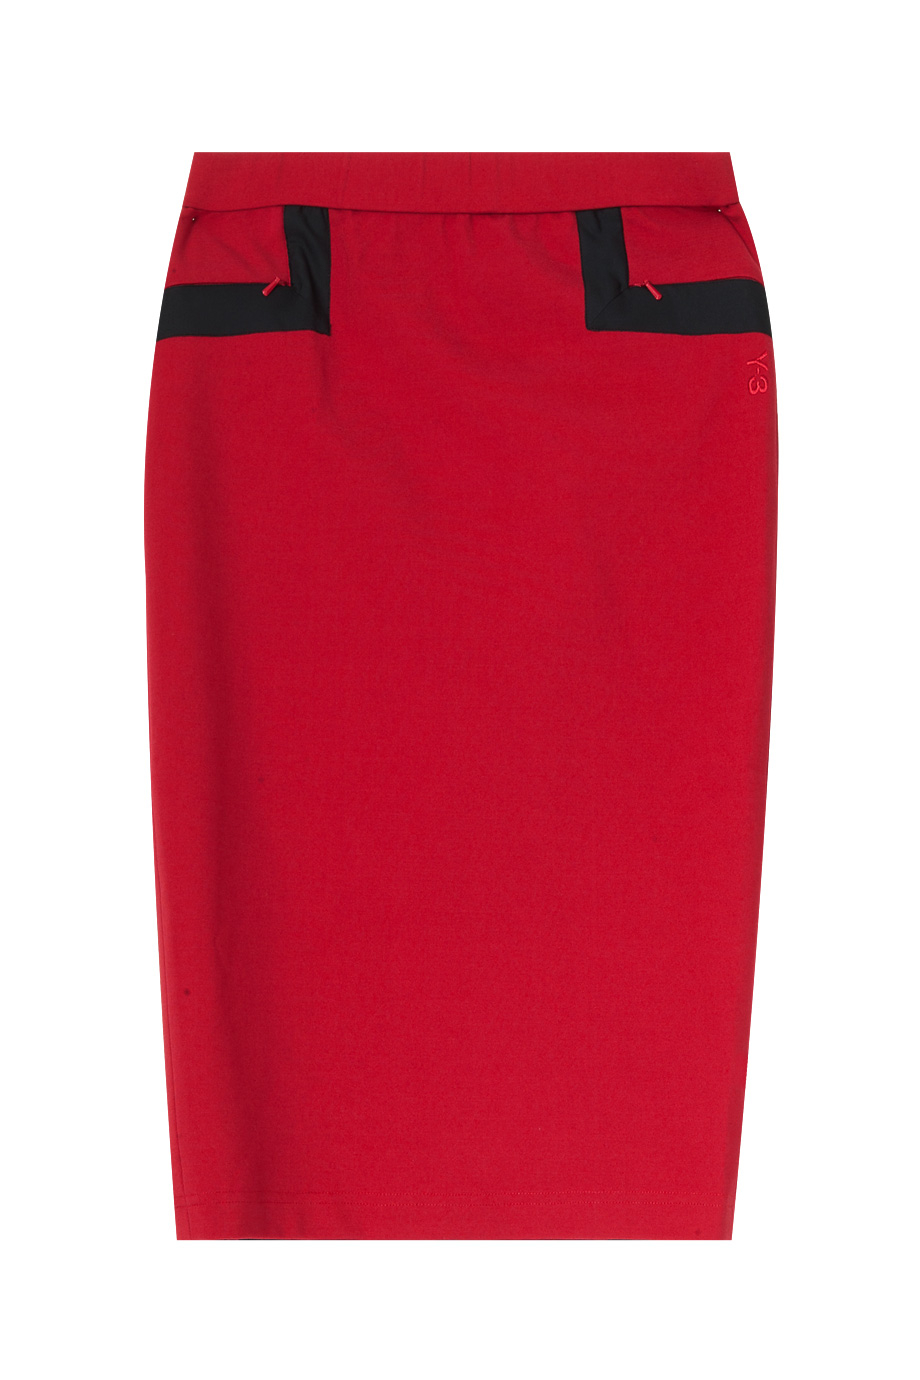 Lyst - Y-3 Lux Skirt in Red